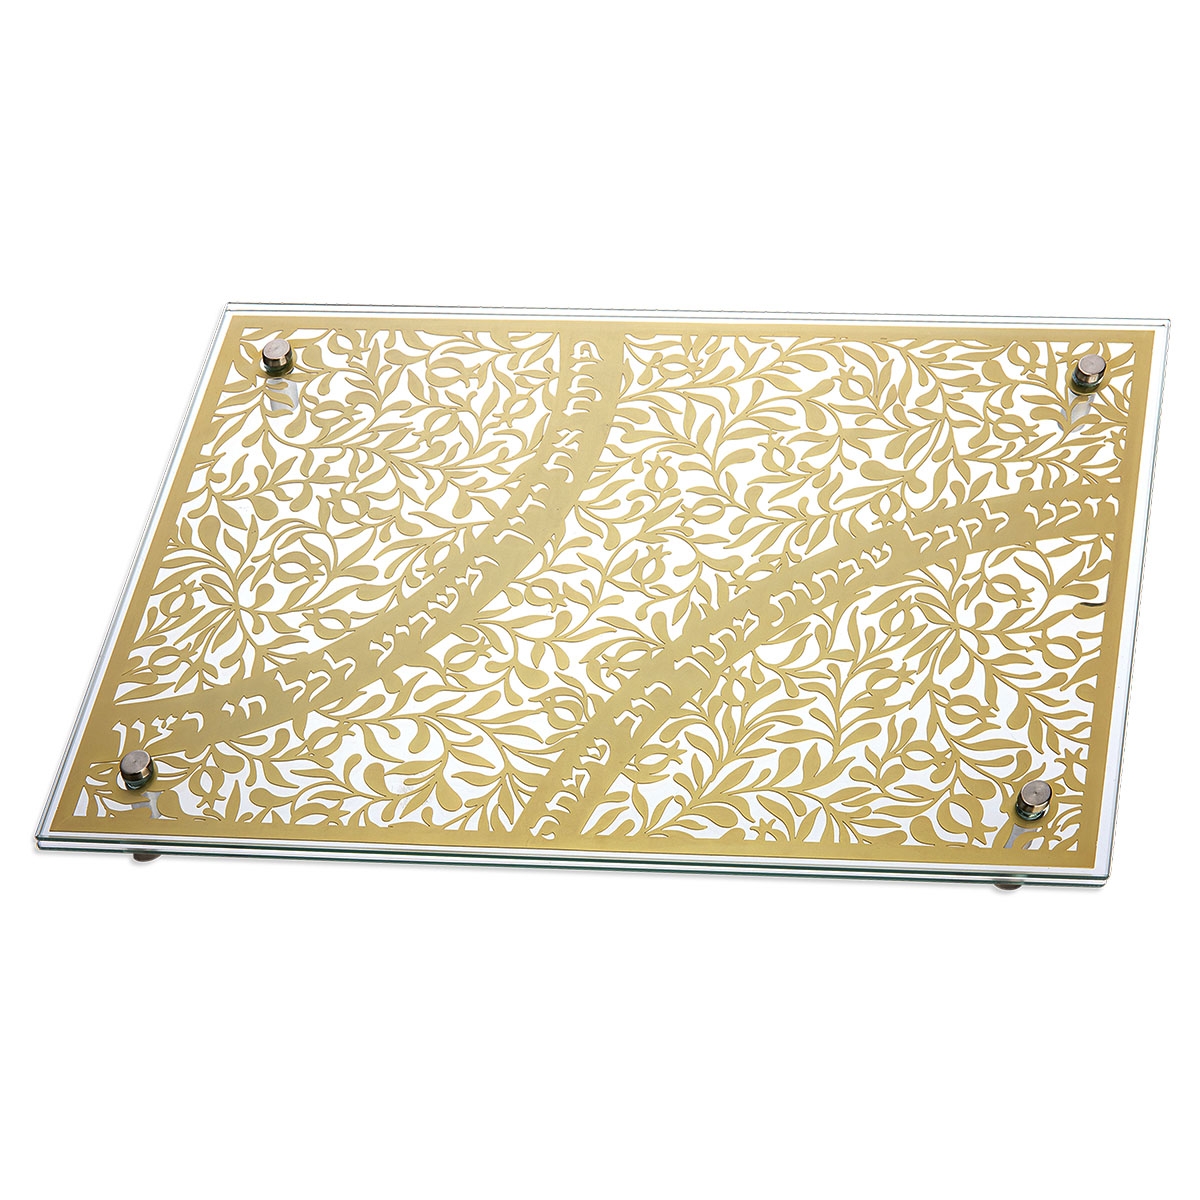 Designer Gold-Plated Challah Board With Shabbat Verses By Dorit Judaica  - 1